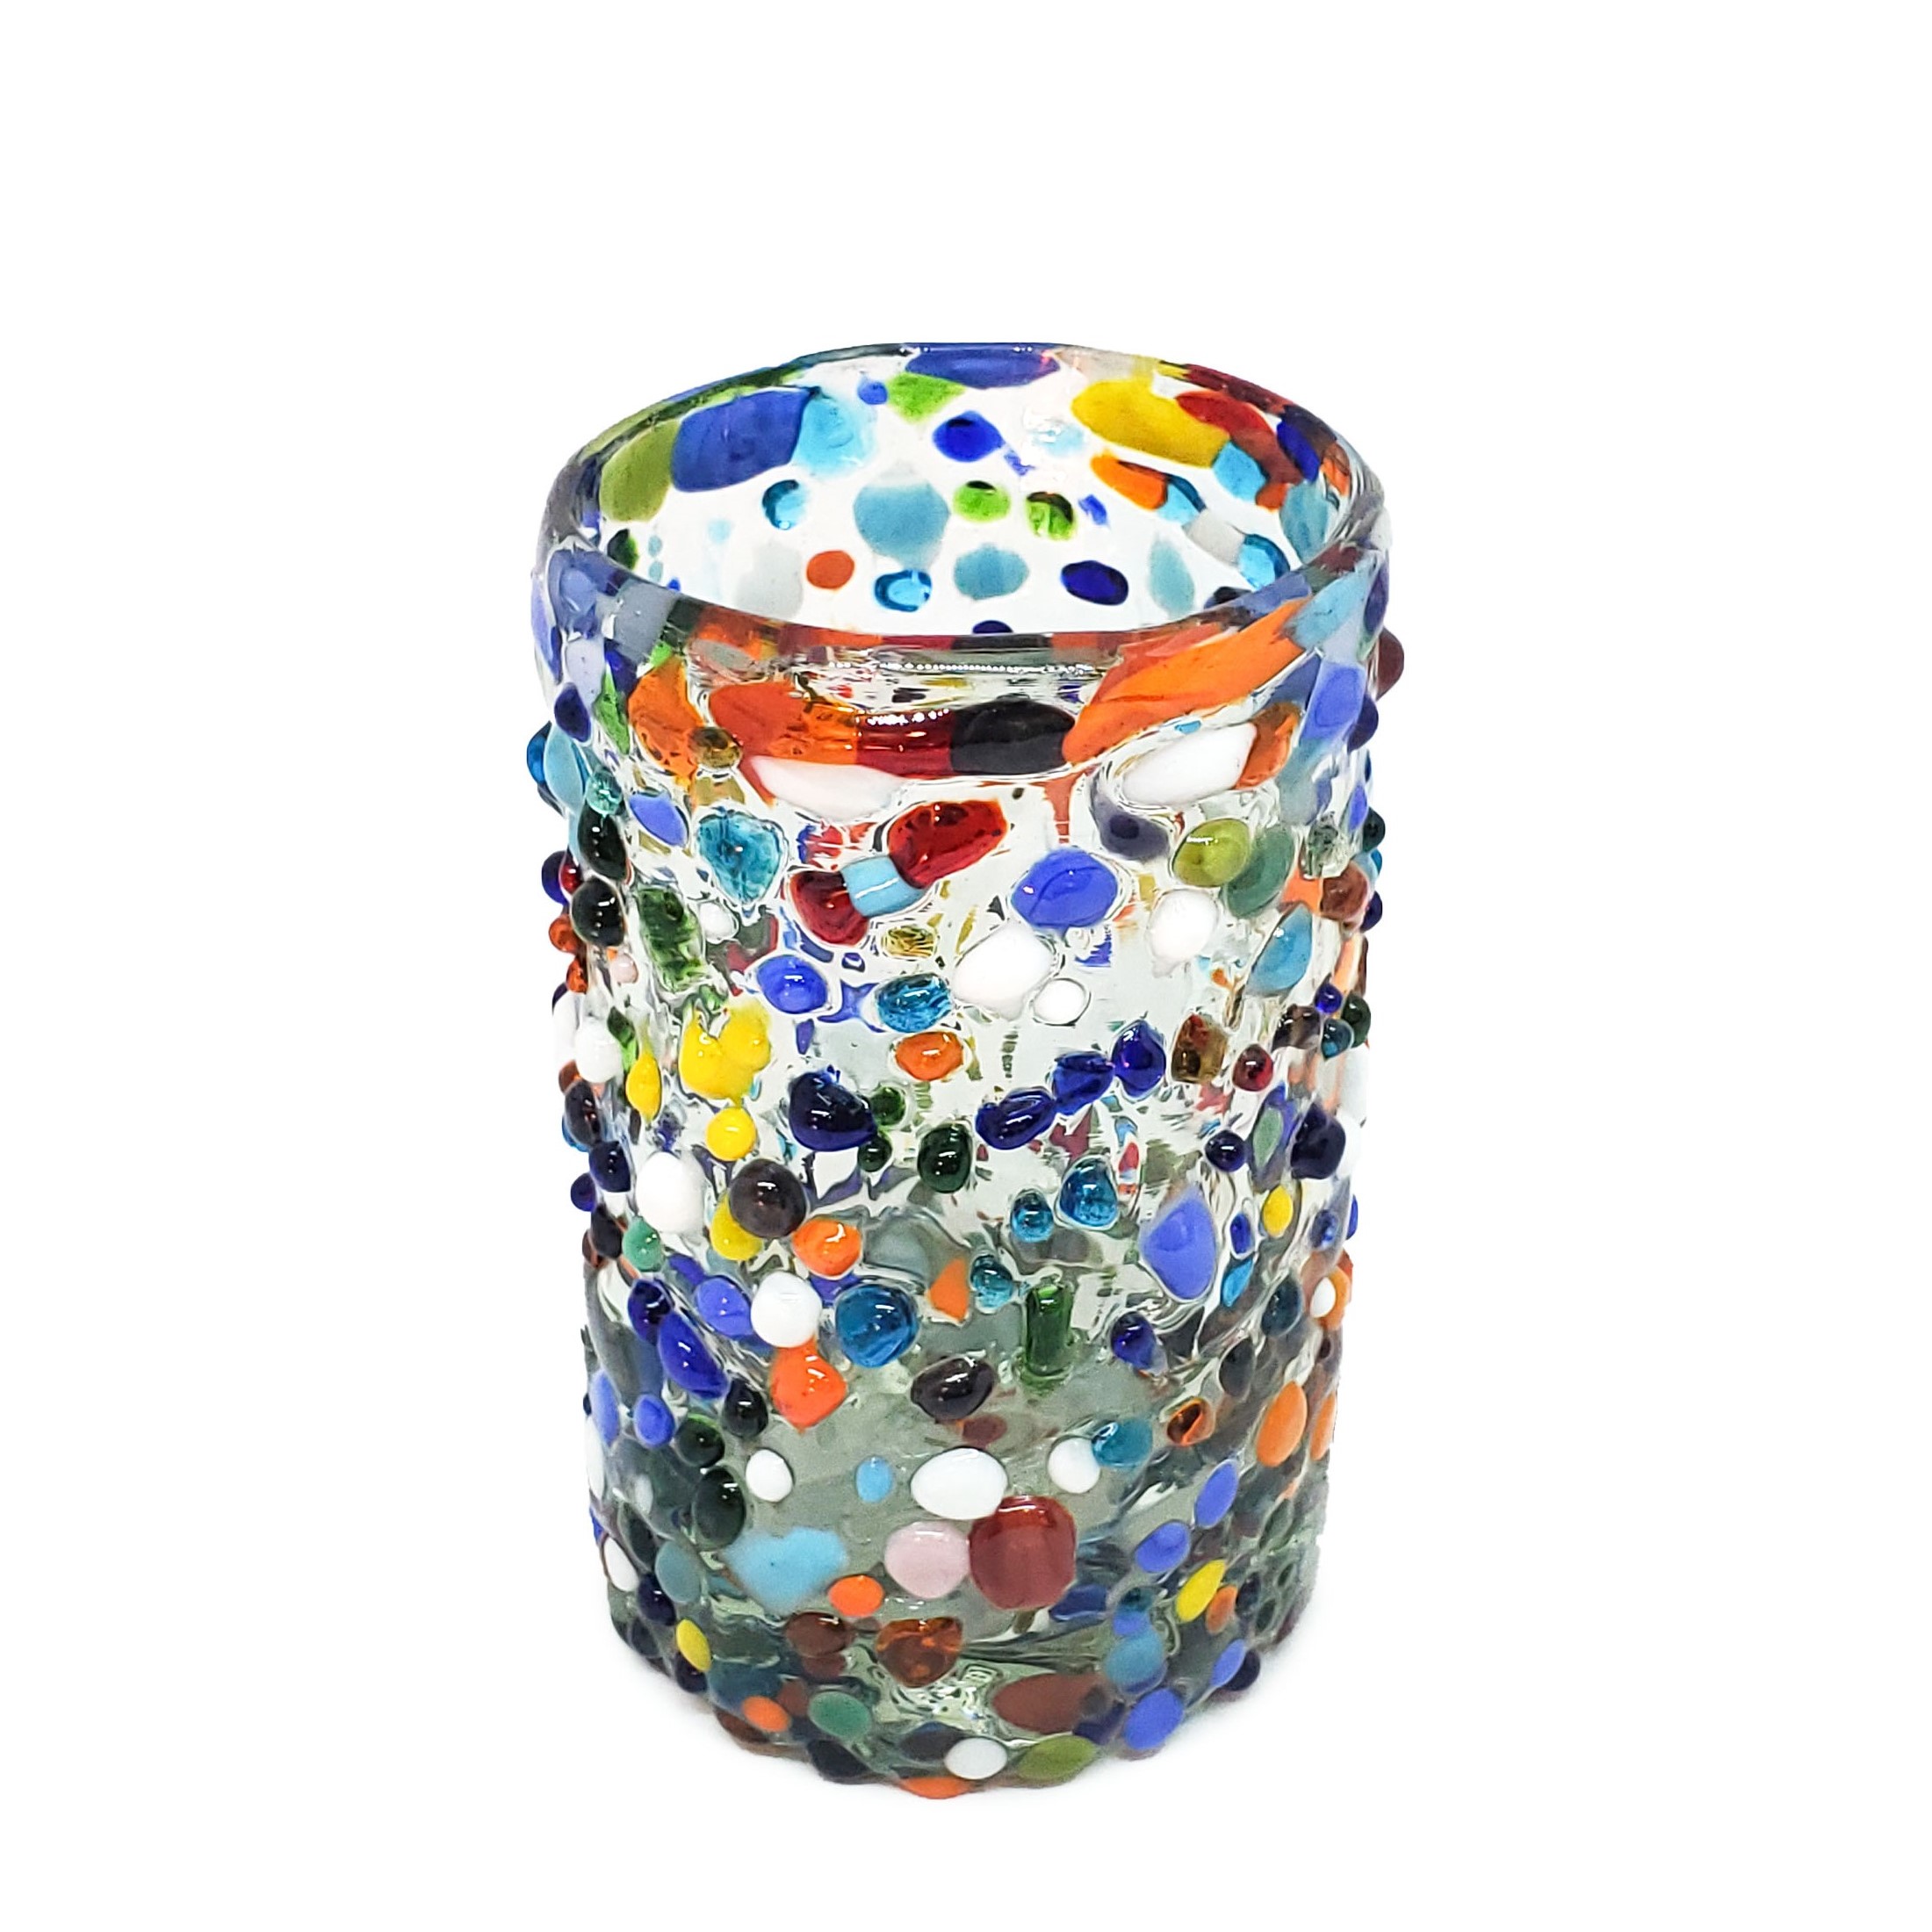 New Items / Confetti Rocks 9 oz Juice Glasses  / Let the spring come into your home with this colorful set of glasses. The multicolor glass rocks decoration makes them a standout in any place.